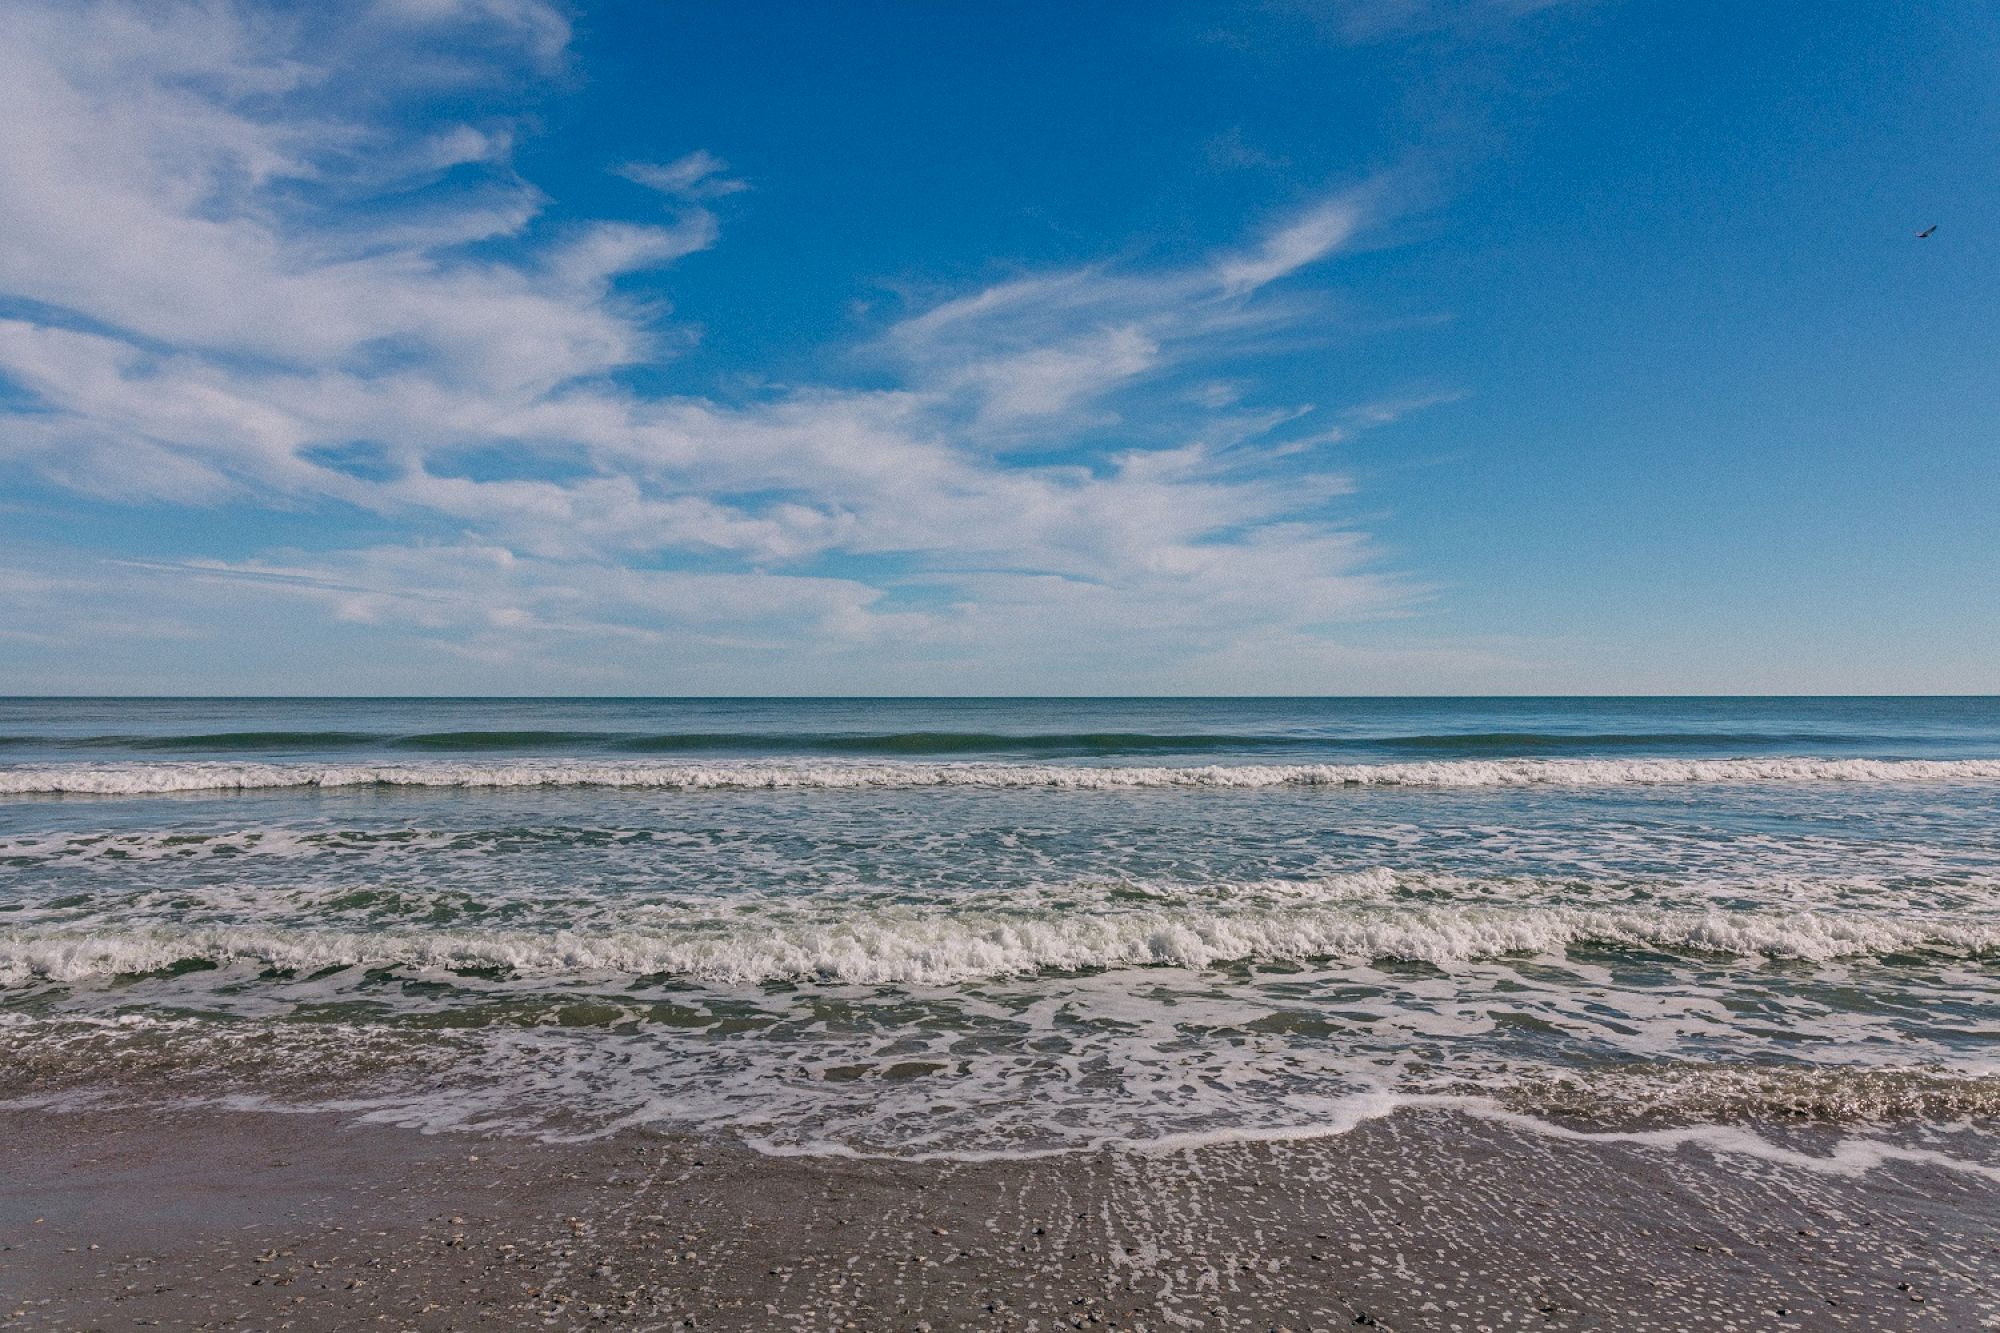 A serene beach scene with gentle waves rolling onto the shore under a partly cloudy blue sky, suggesting a peaceful coastal day.